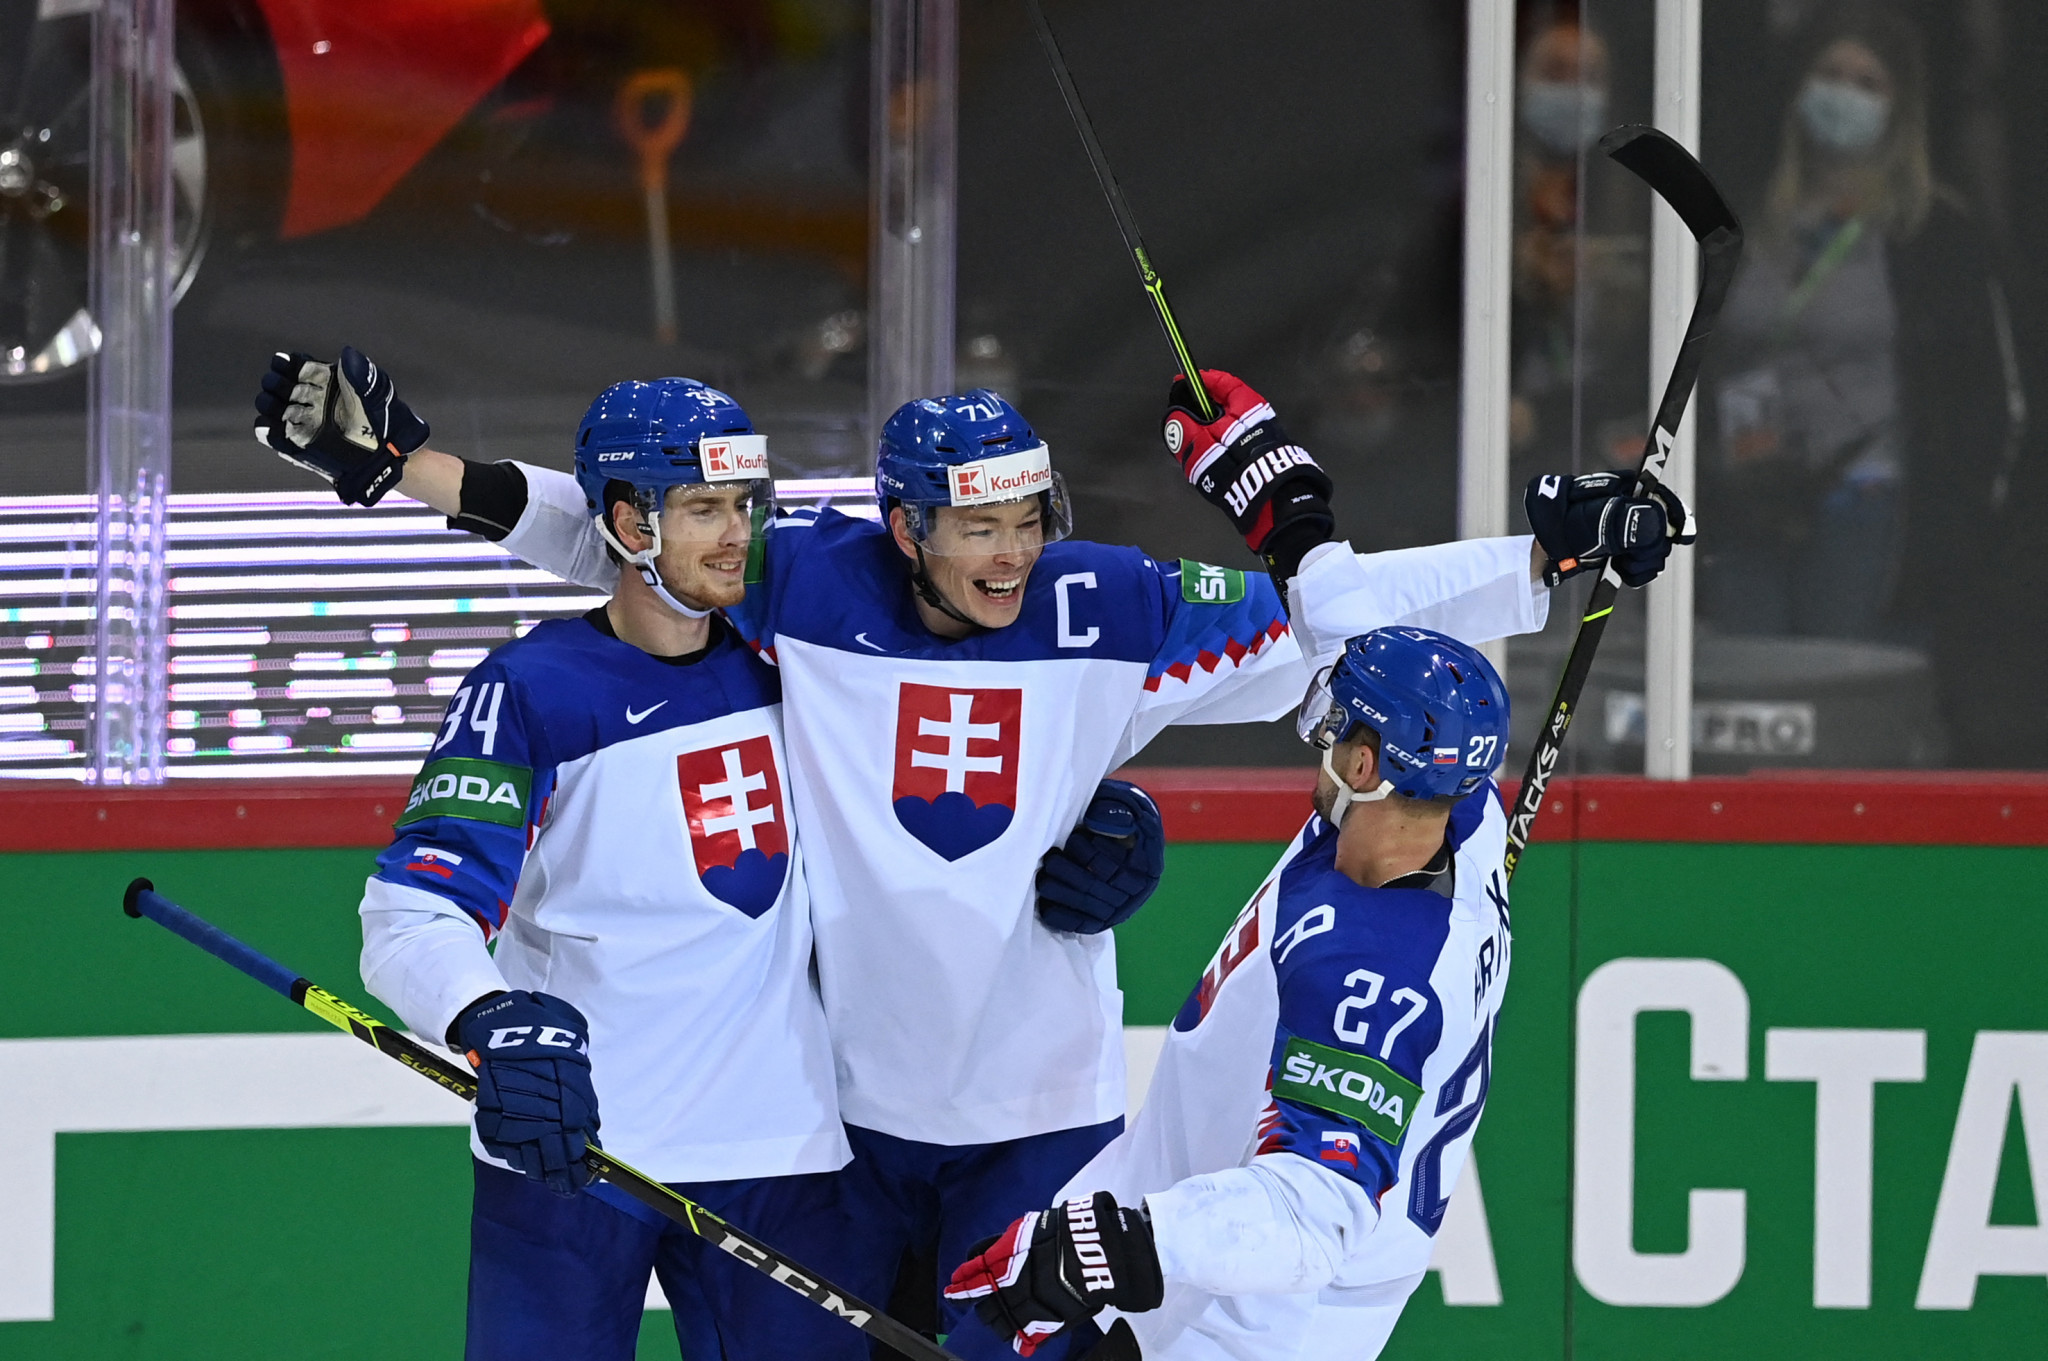 Slovak Ice Hockey Federation decide not to call up KHL players for IIHF World Championship